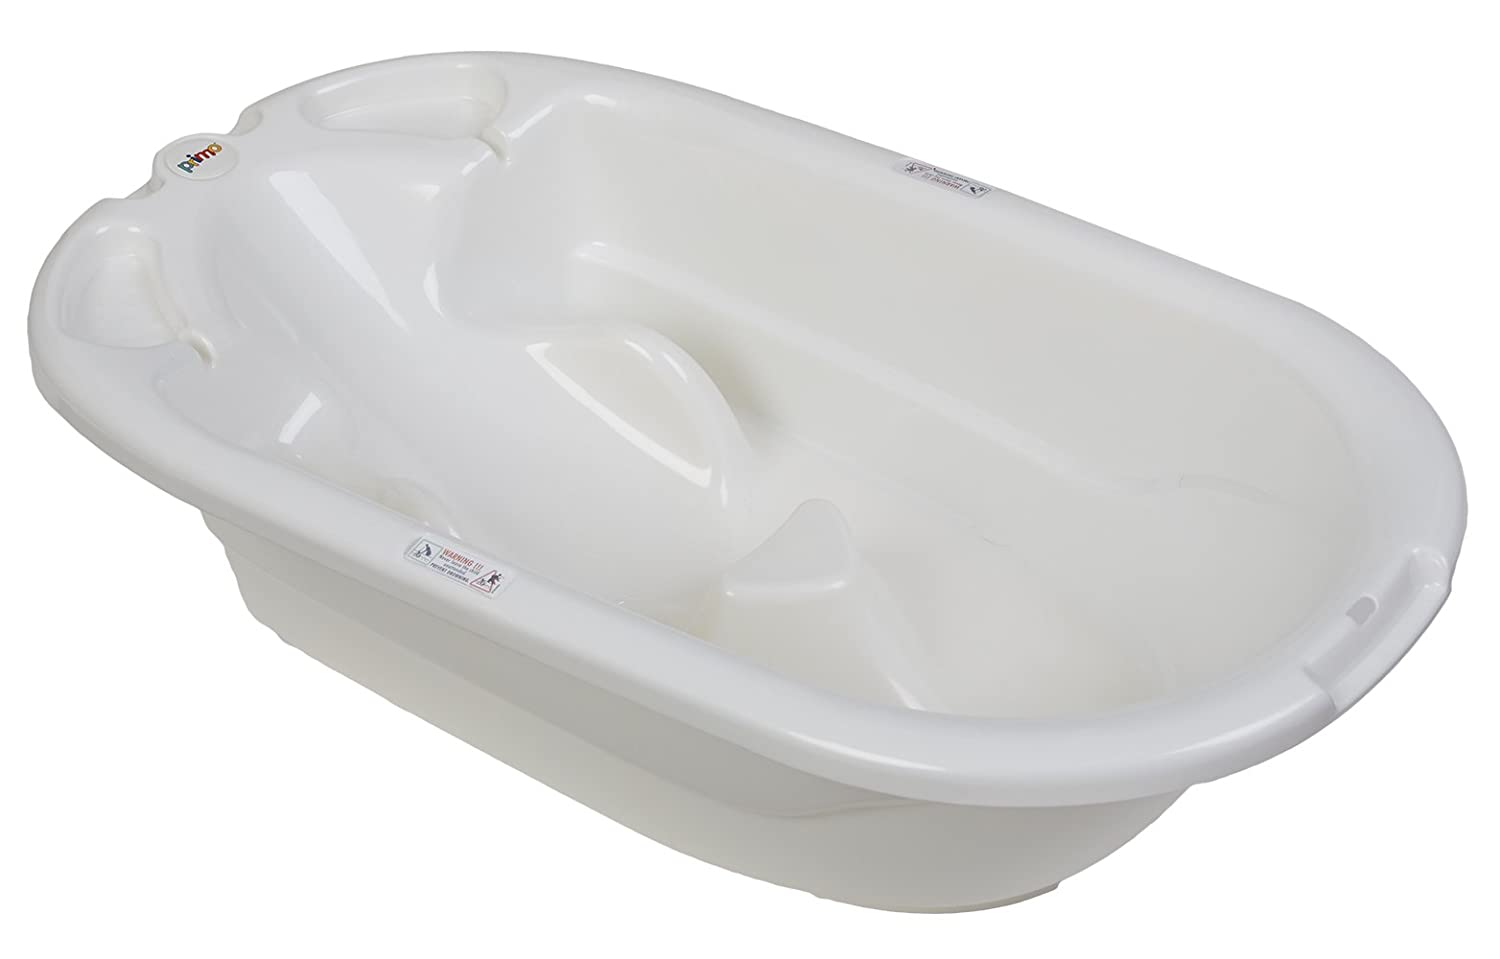 Top 7 Best Infant Tubs For Newborn Reviews in 2022 1